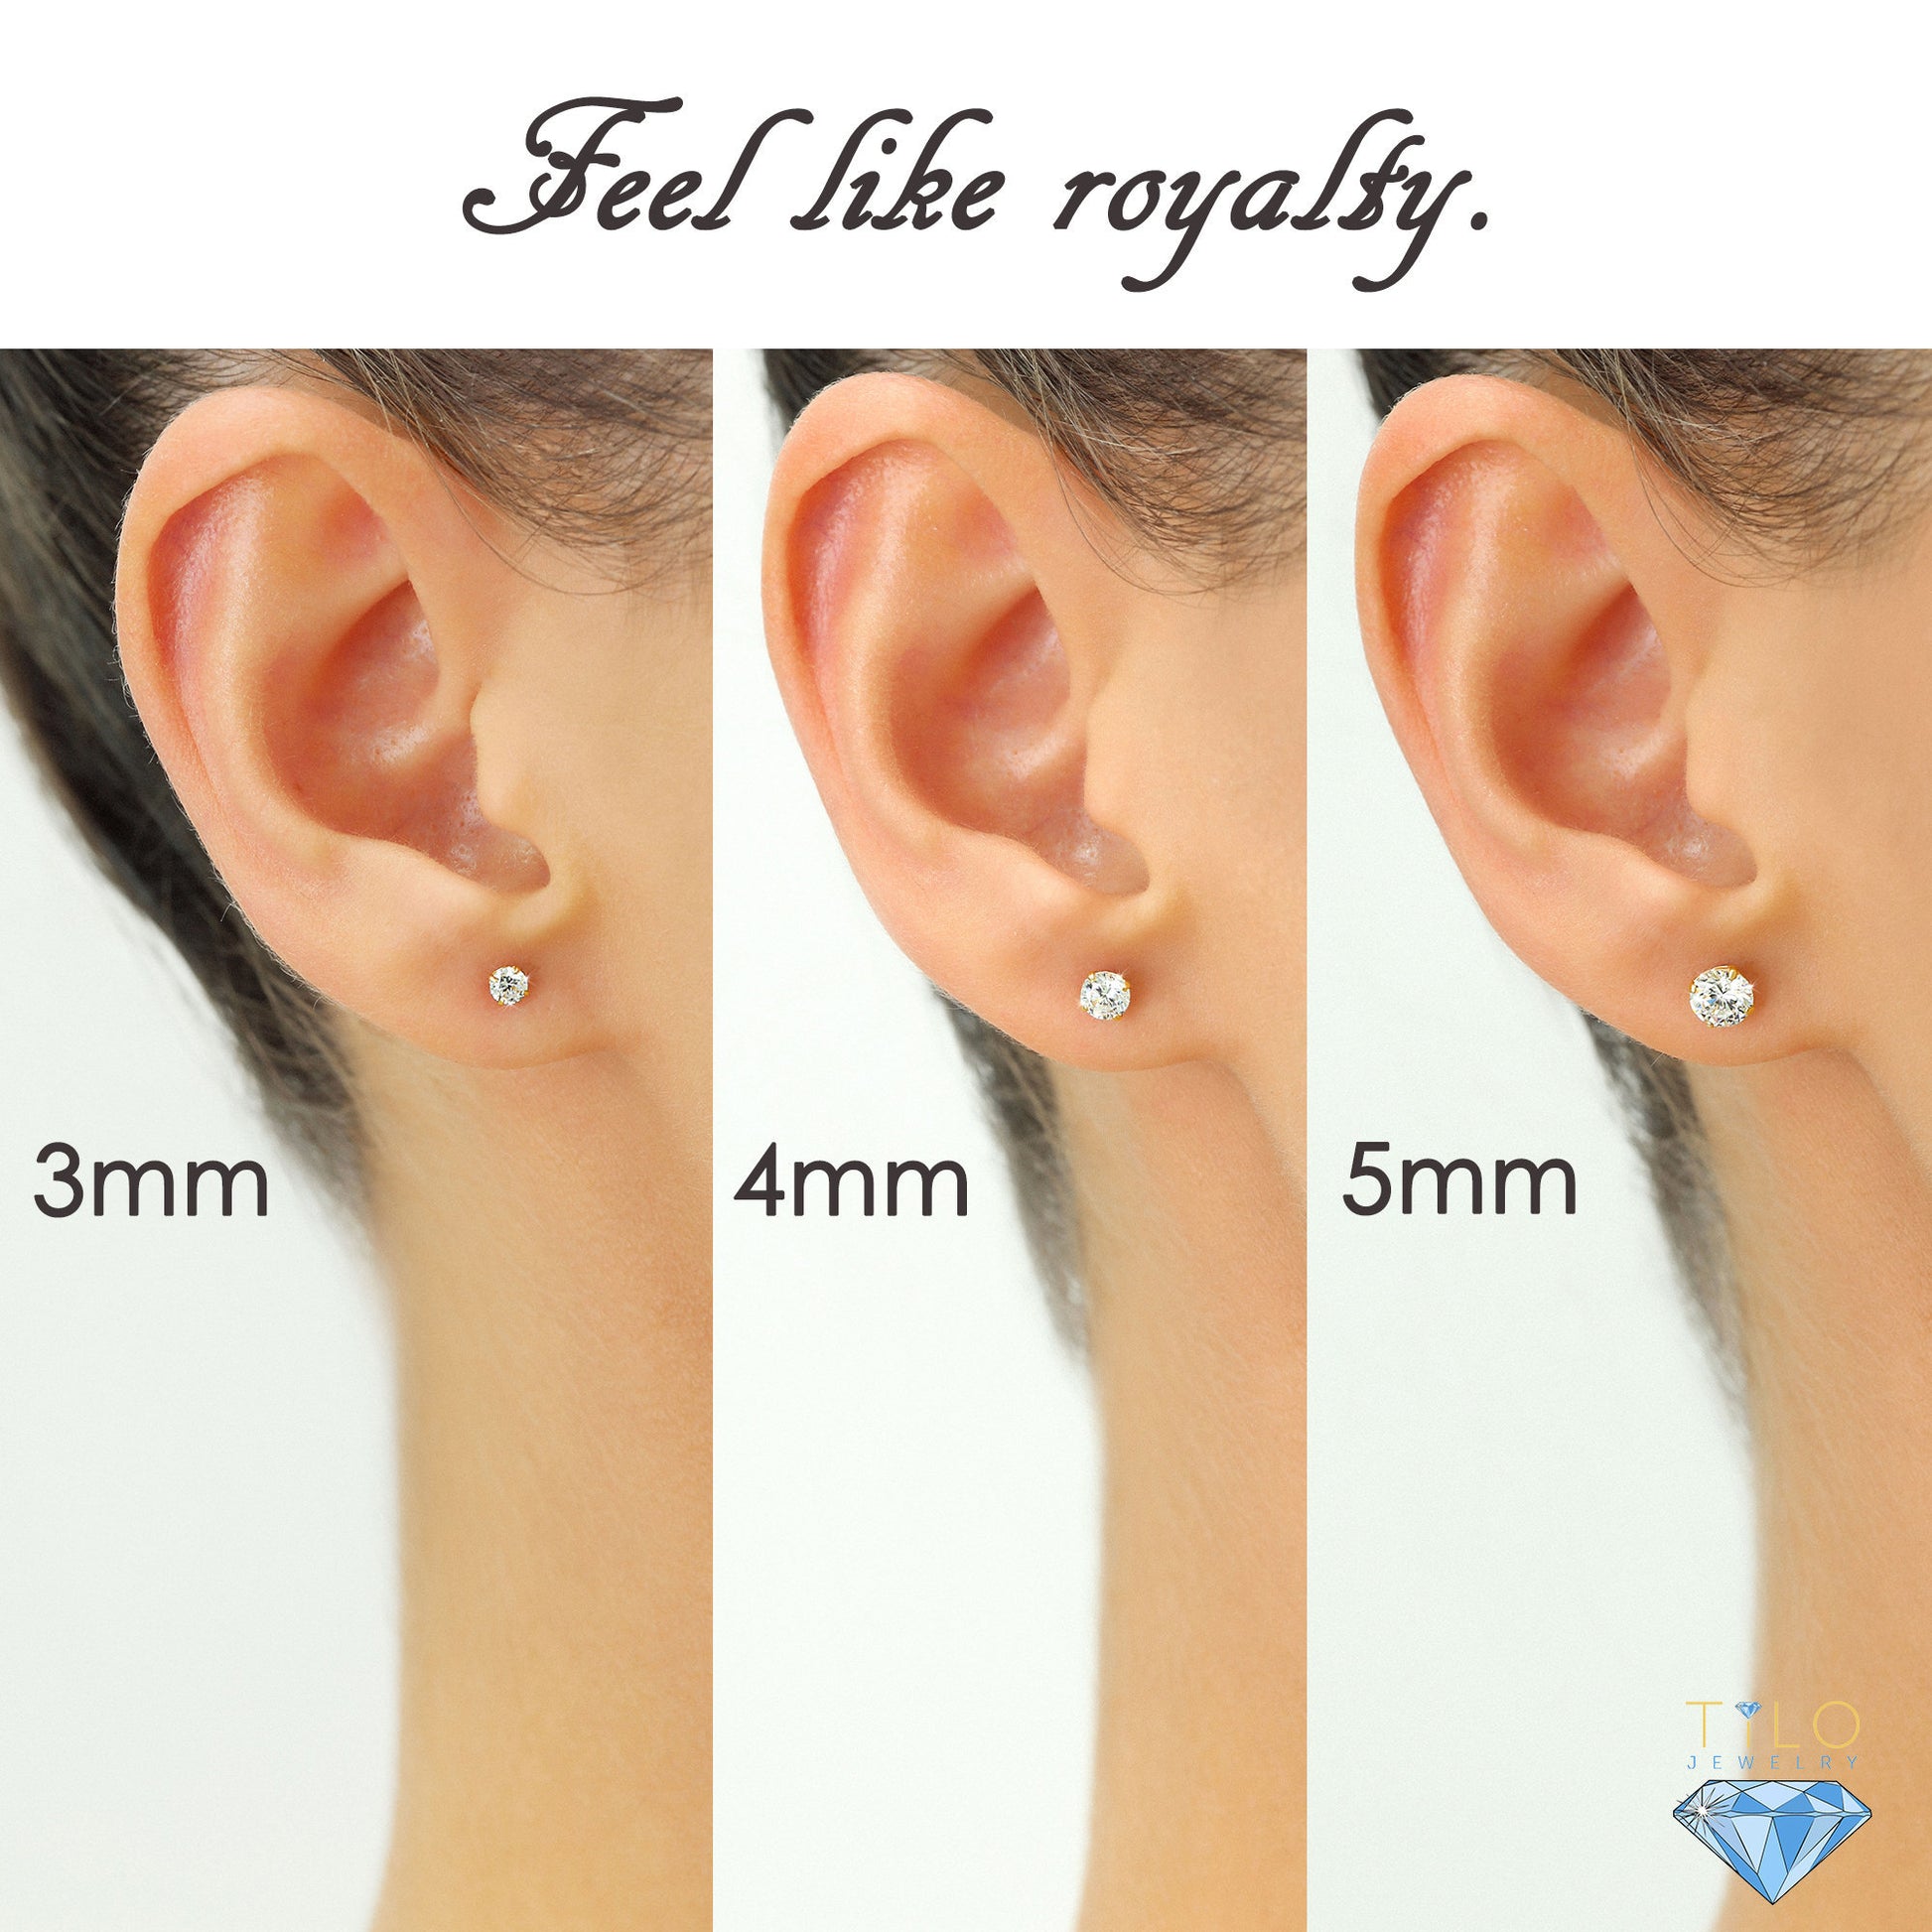 4mm Classic Round Studs, Baby/Children's Earrings, Screw Back - 14K Gold